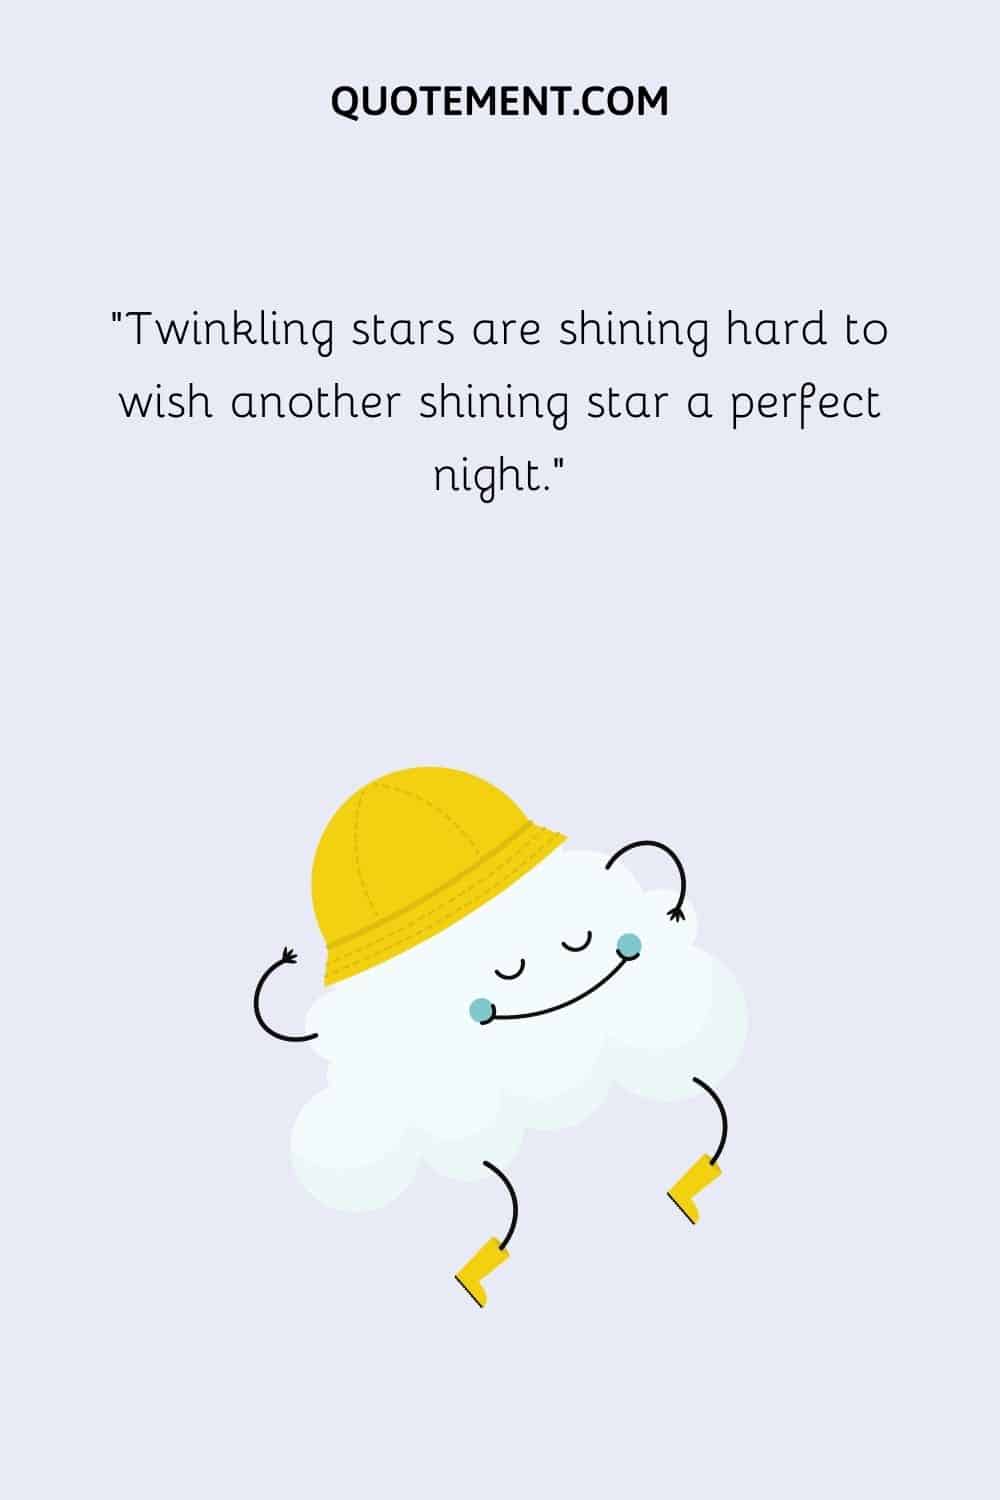 Twinkling stars are shining hard to wish another shining star a perfect night